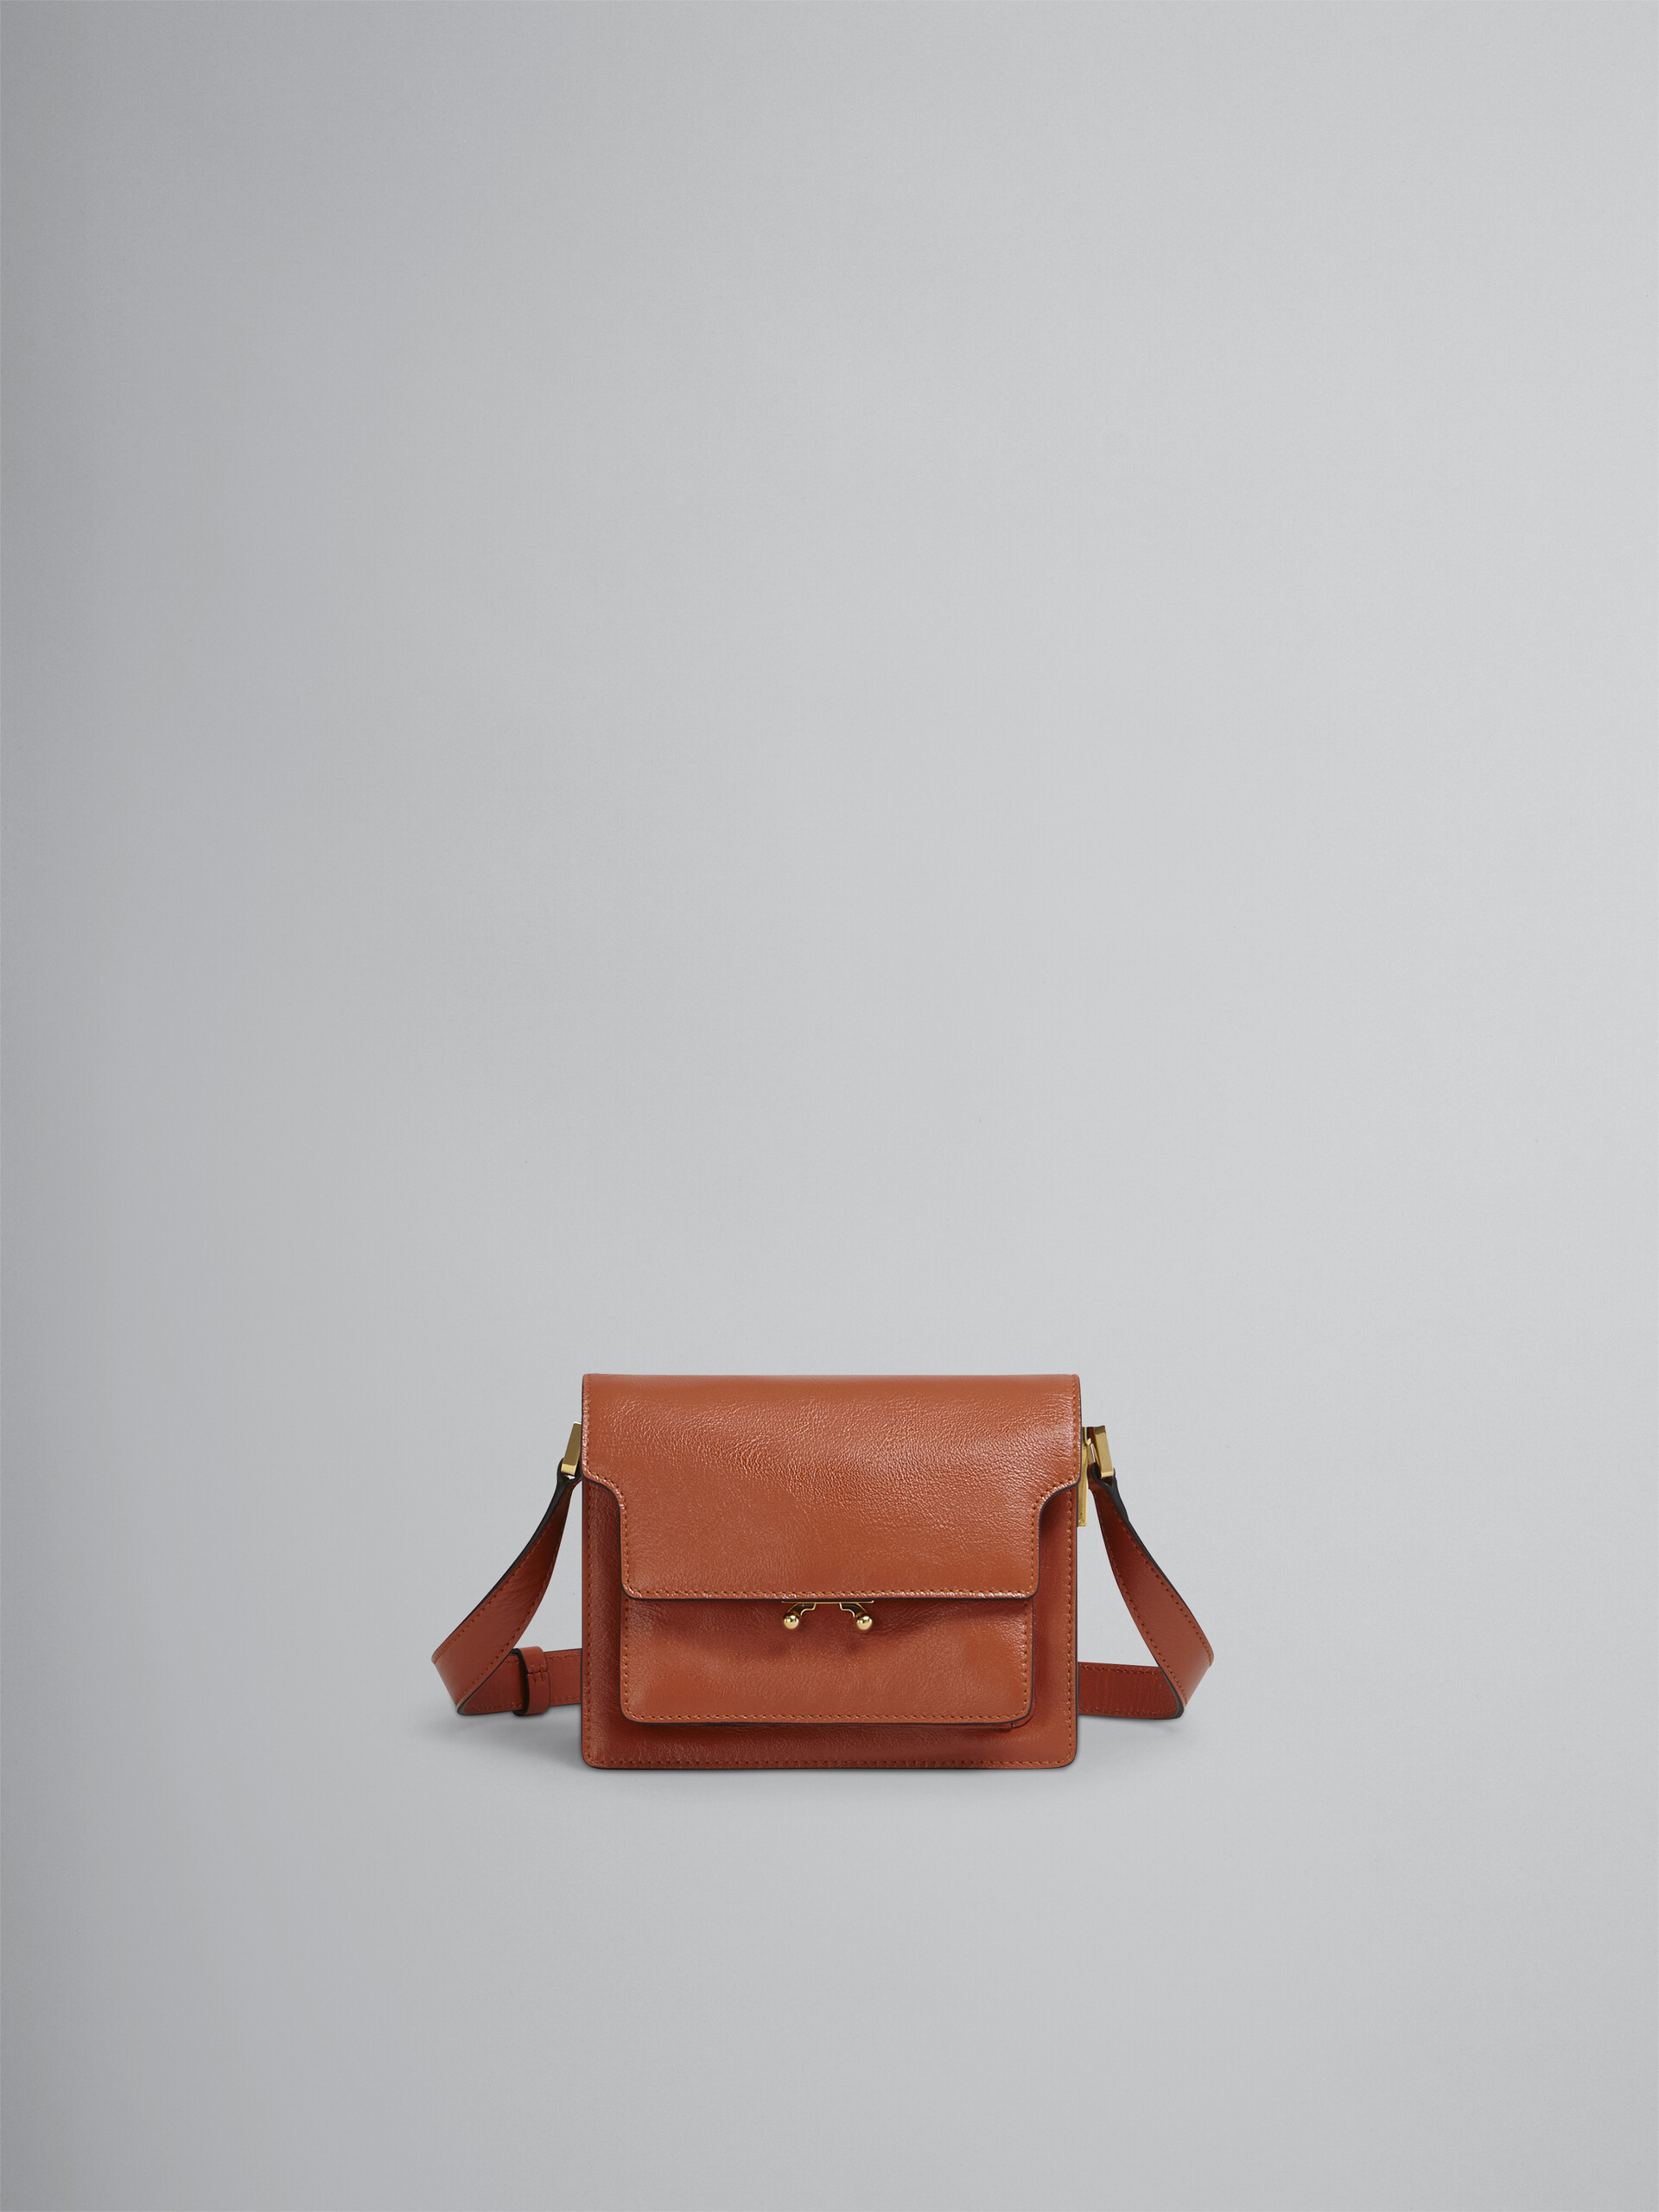 TRUNK SOFT mini bag in brown leather - Shoulder Bags - Image 1